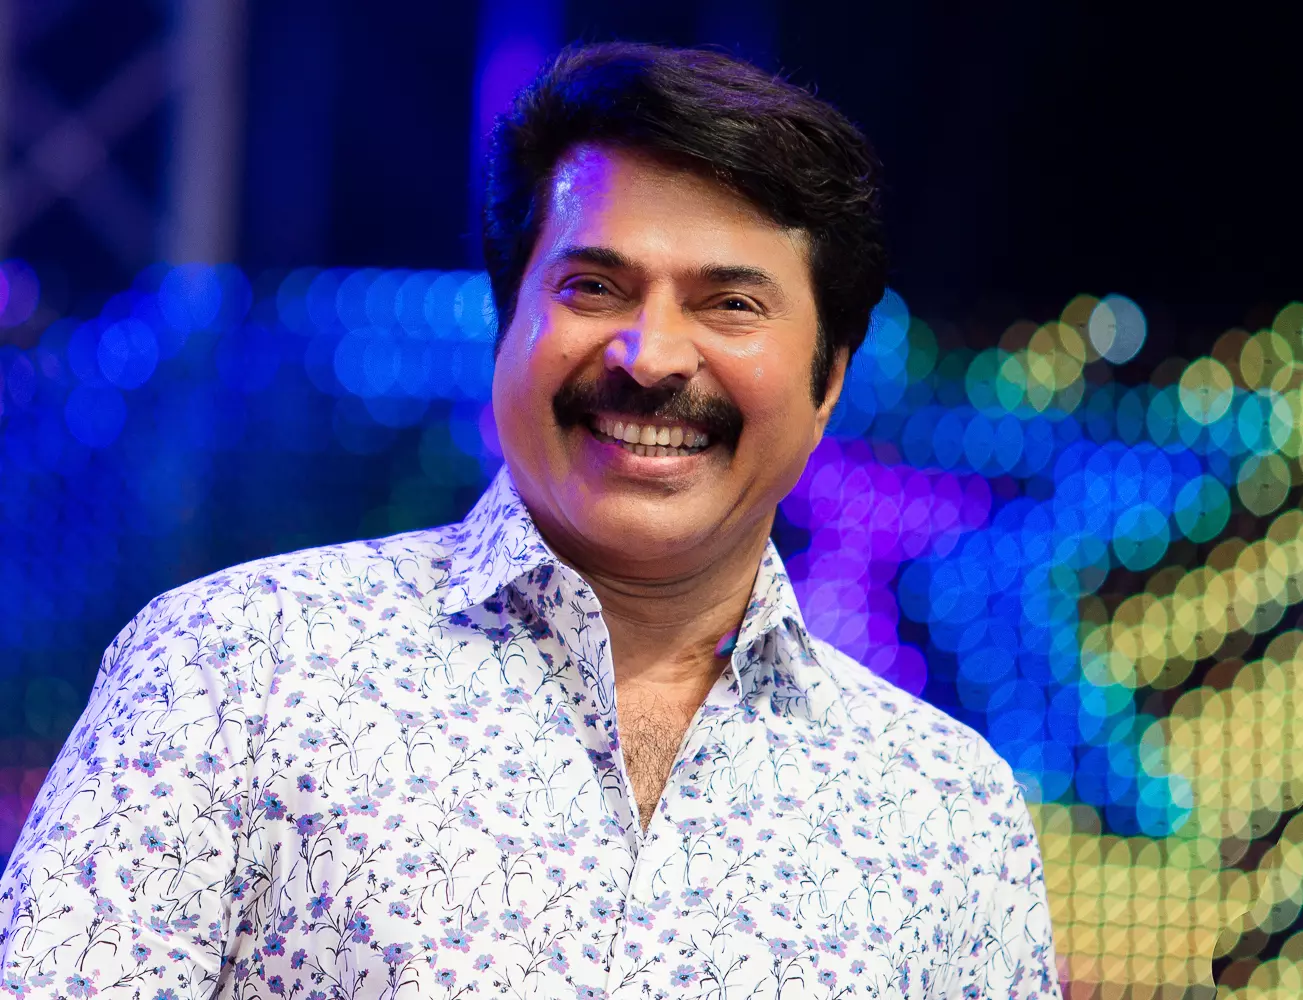 No Padma Bhushan for Mammootty yet again; Is his politics a hurdle?